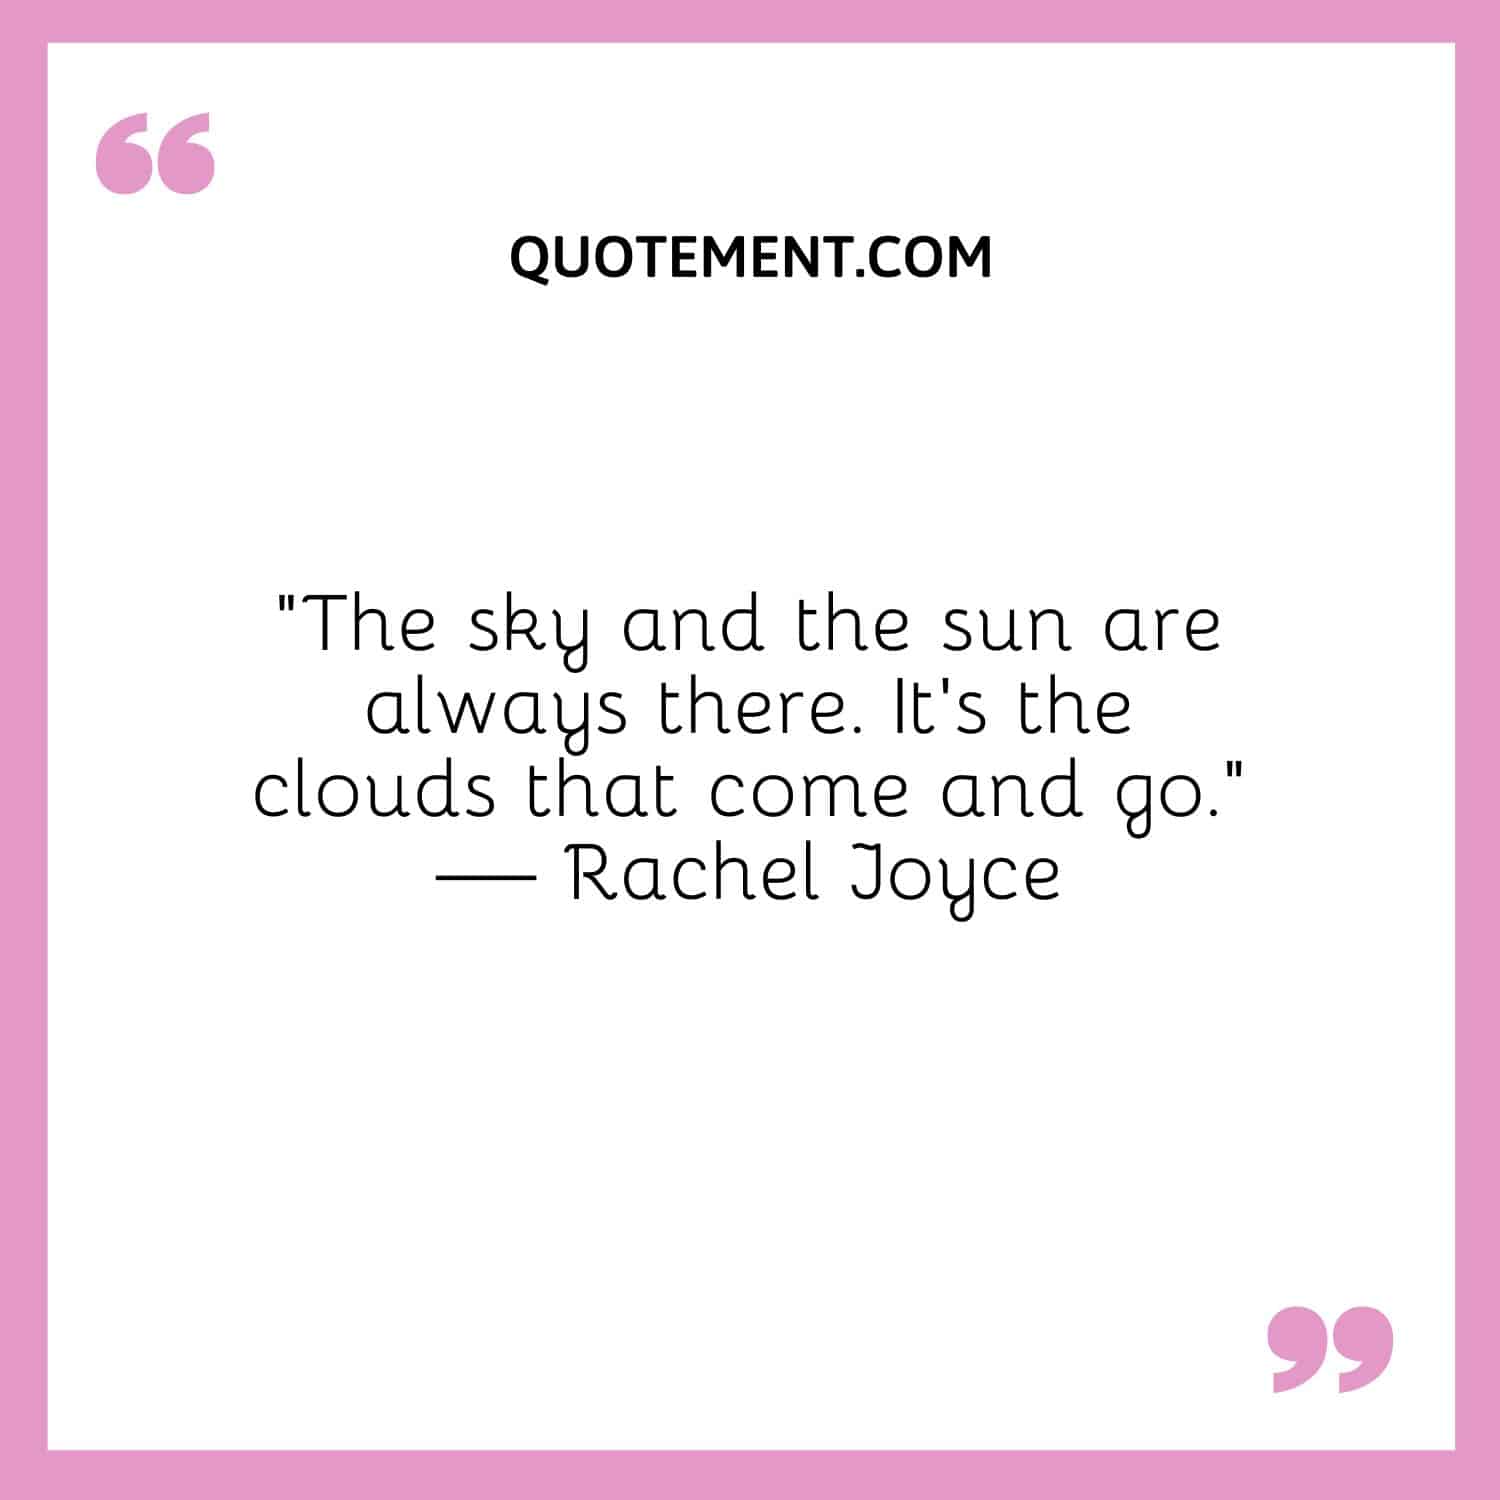 “The sky and the sun are always there. It’s the clouds that come and go.” — Rachel Joyce